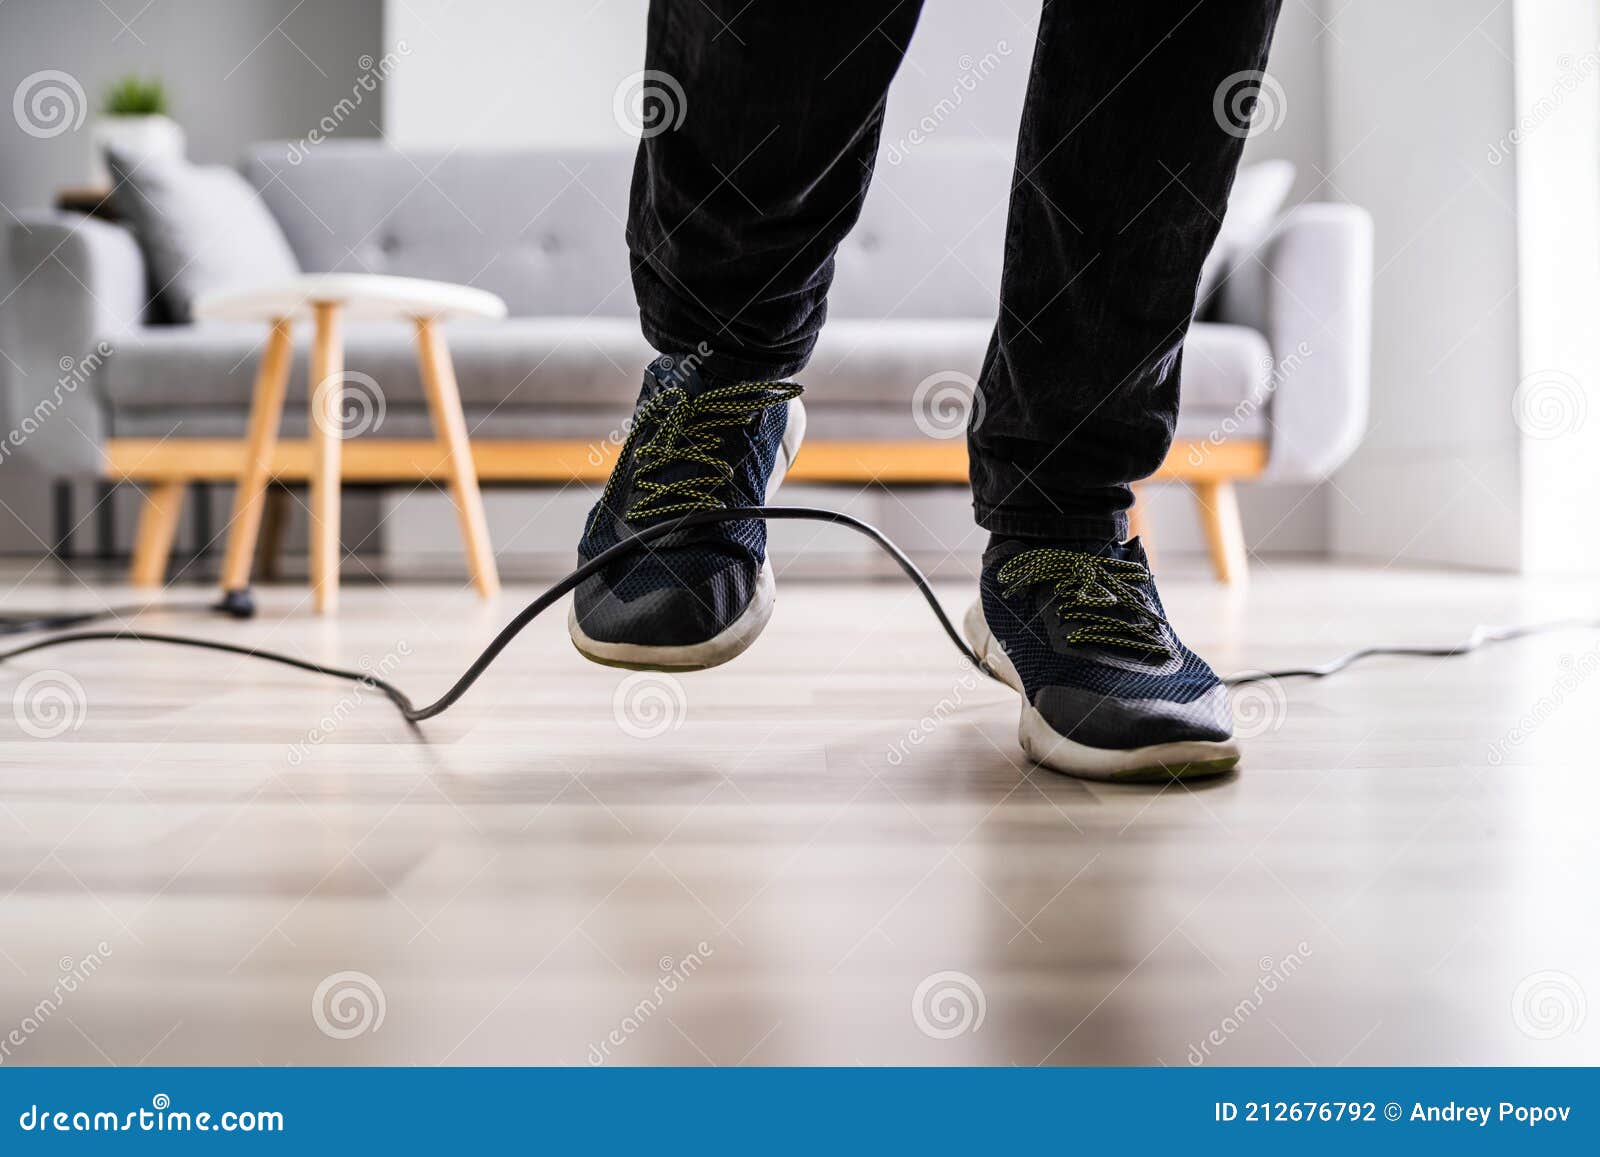 stumble over cable. clumsy office falldown